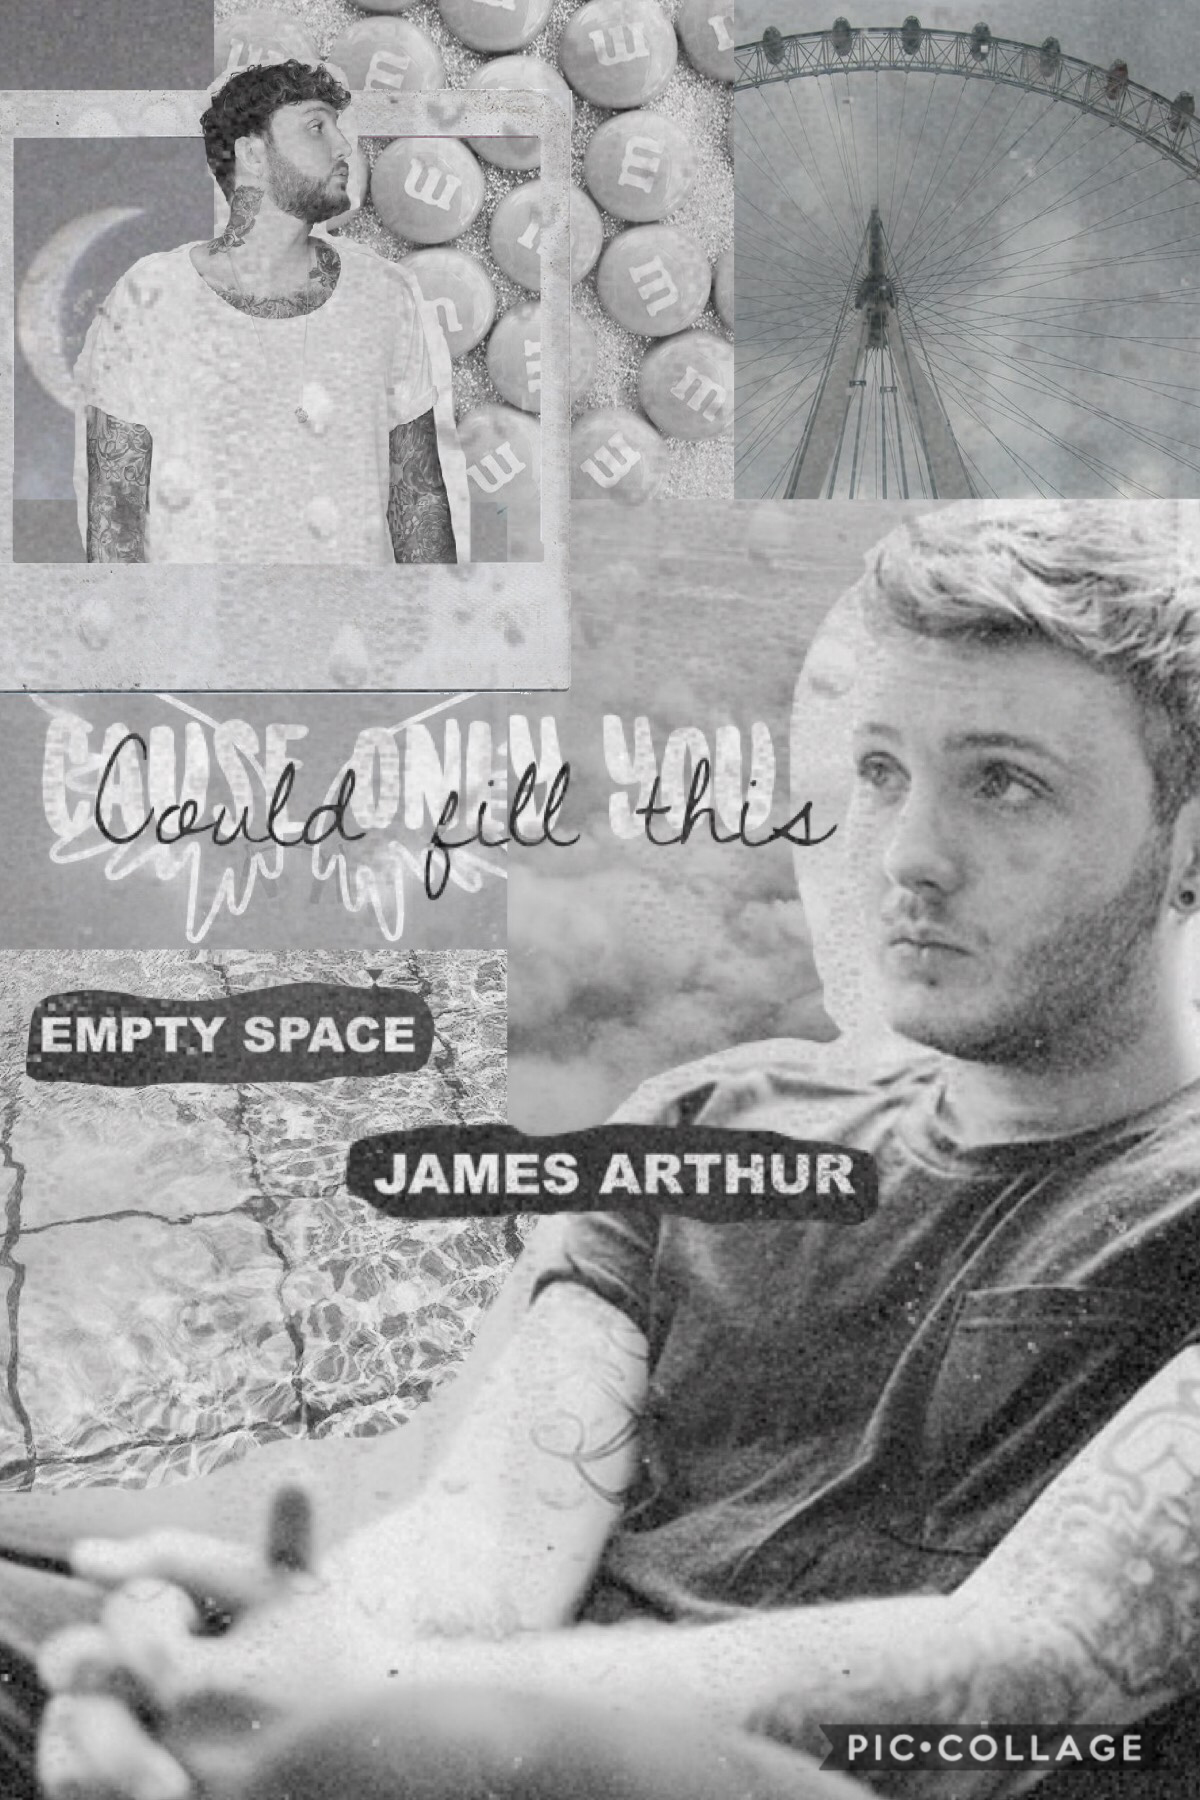 Tap

Themed collage #3 James Arthur Empty Space